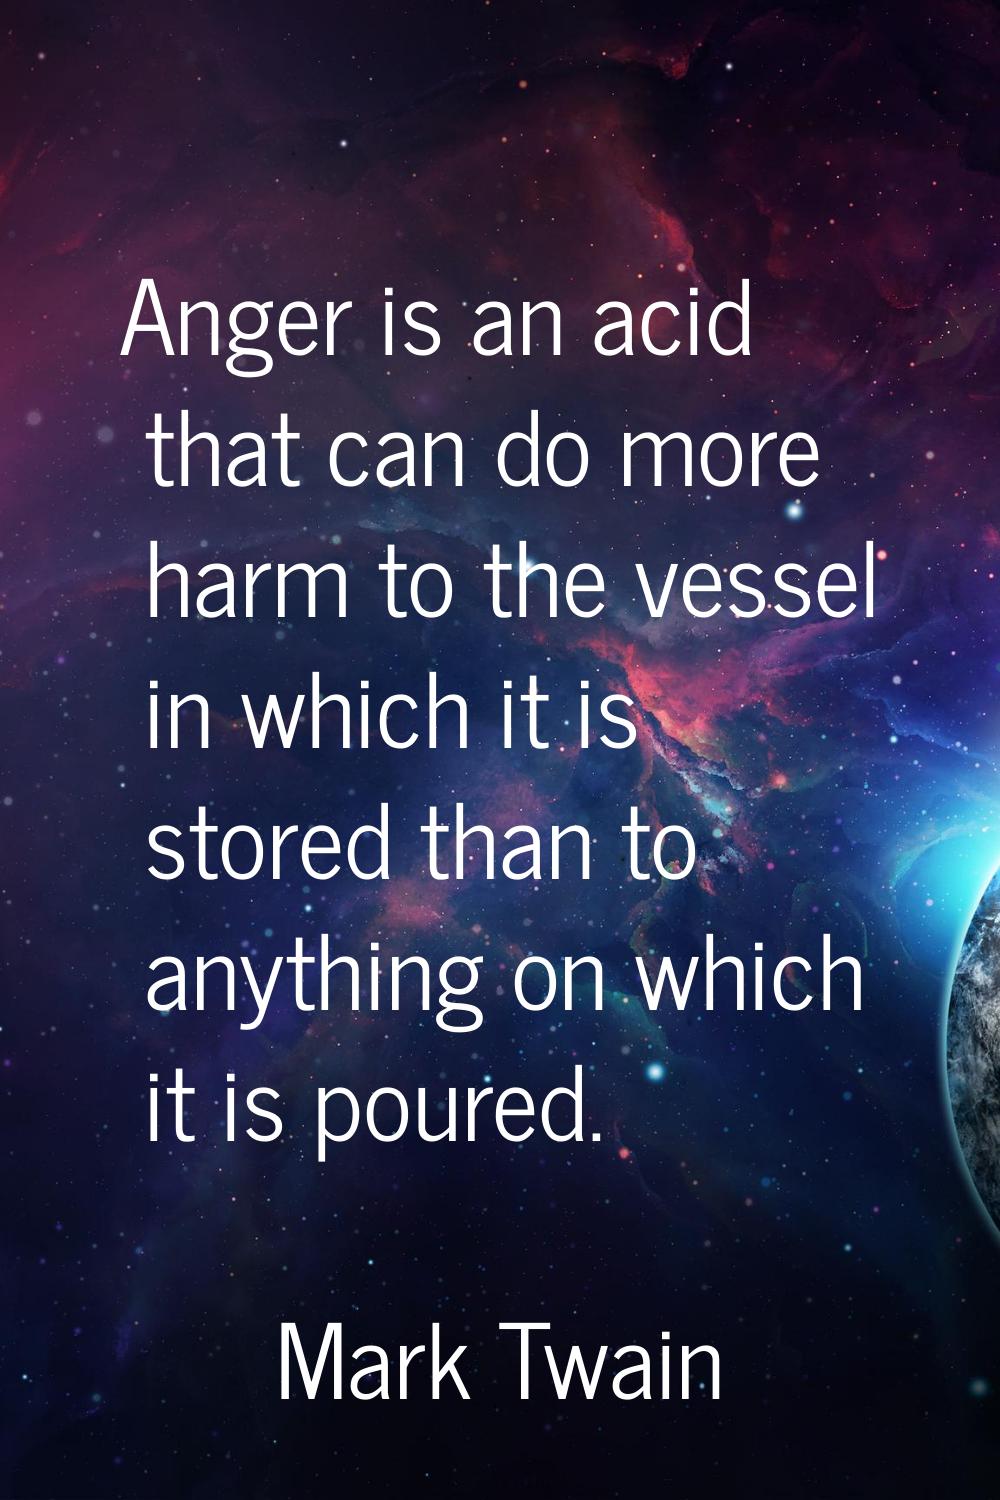 Anger is an acid that can do more harm to the vessel in which it is stored than to anything on whic